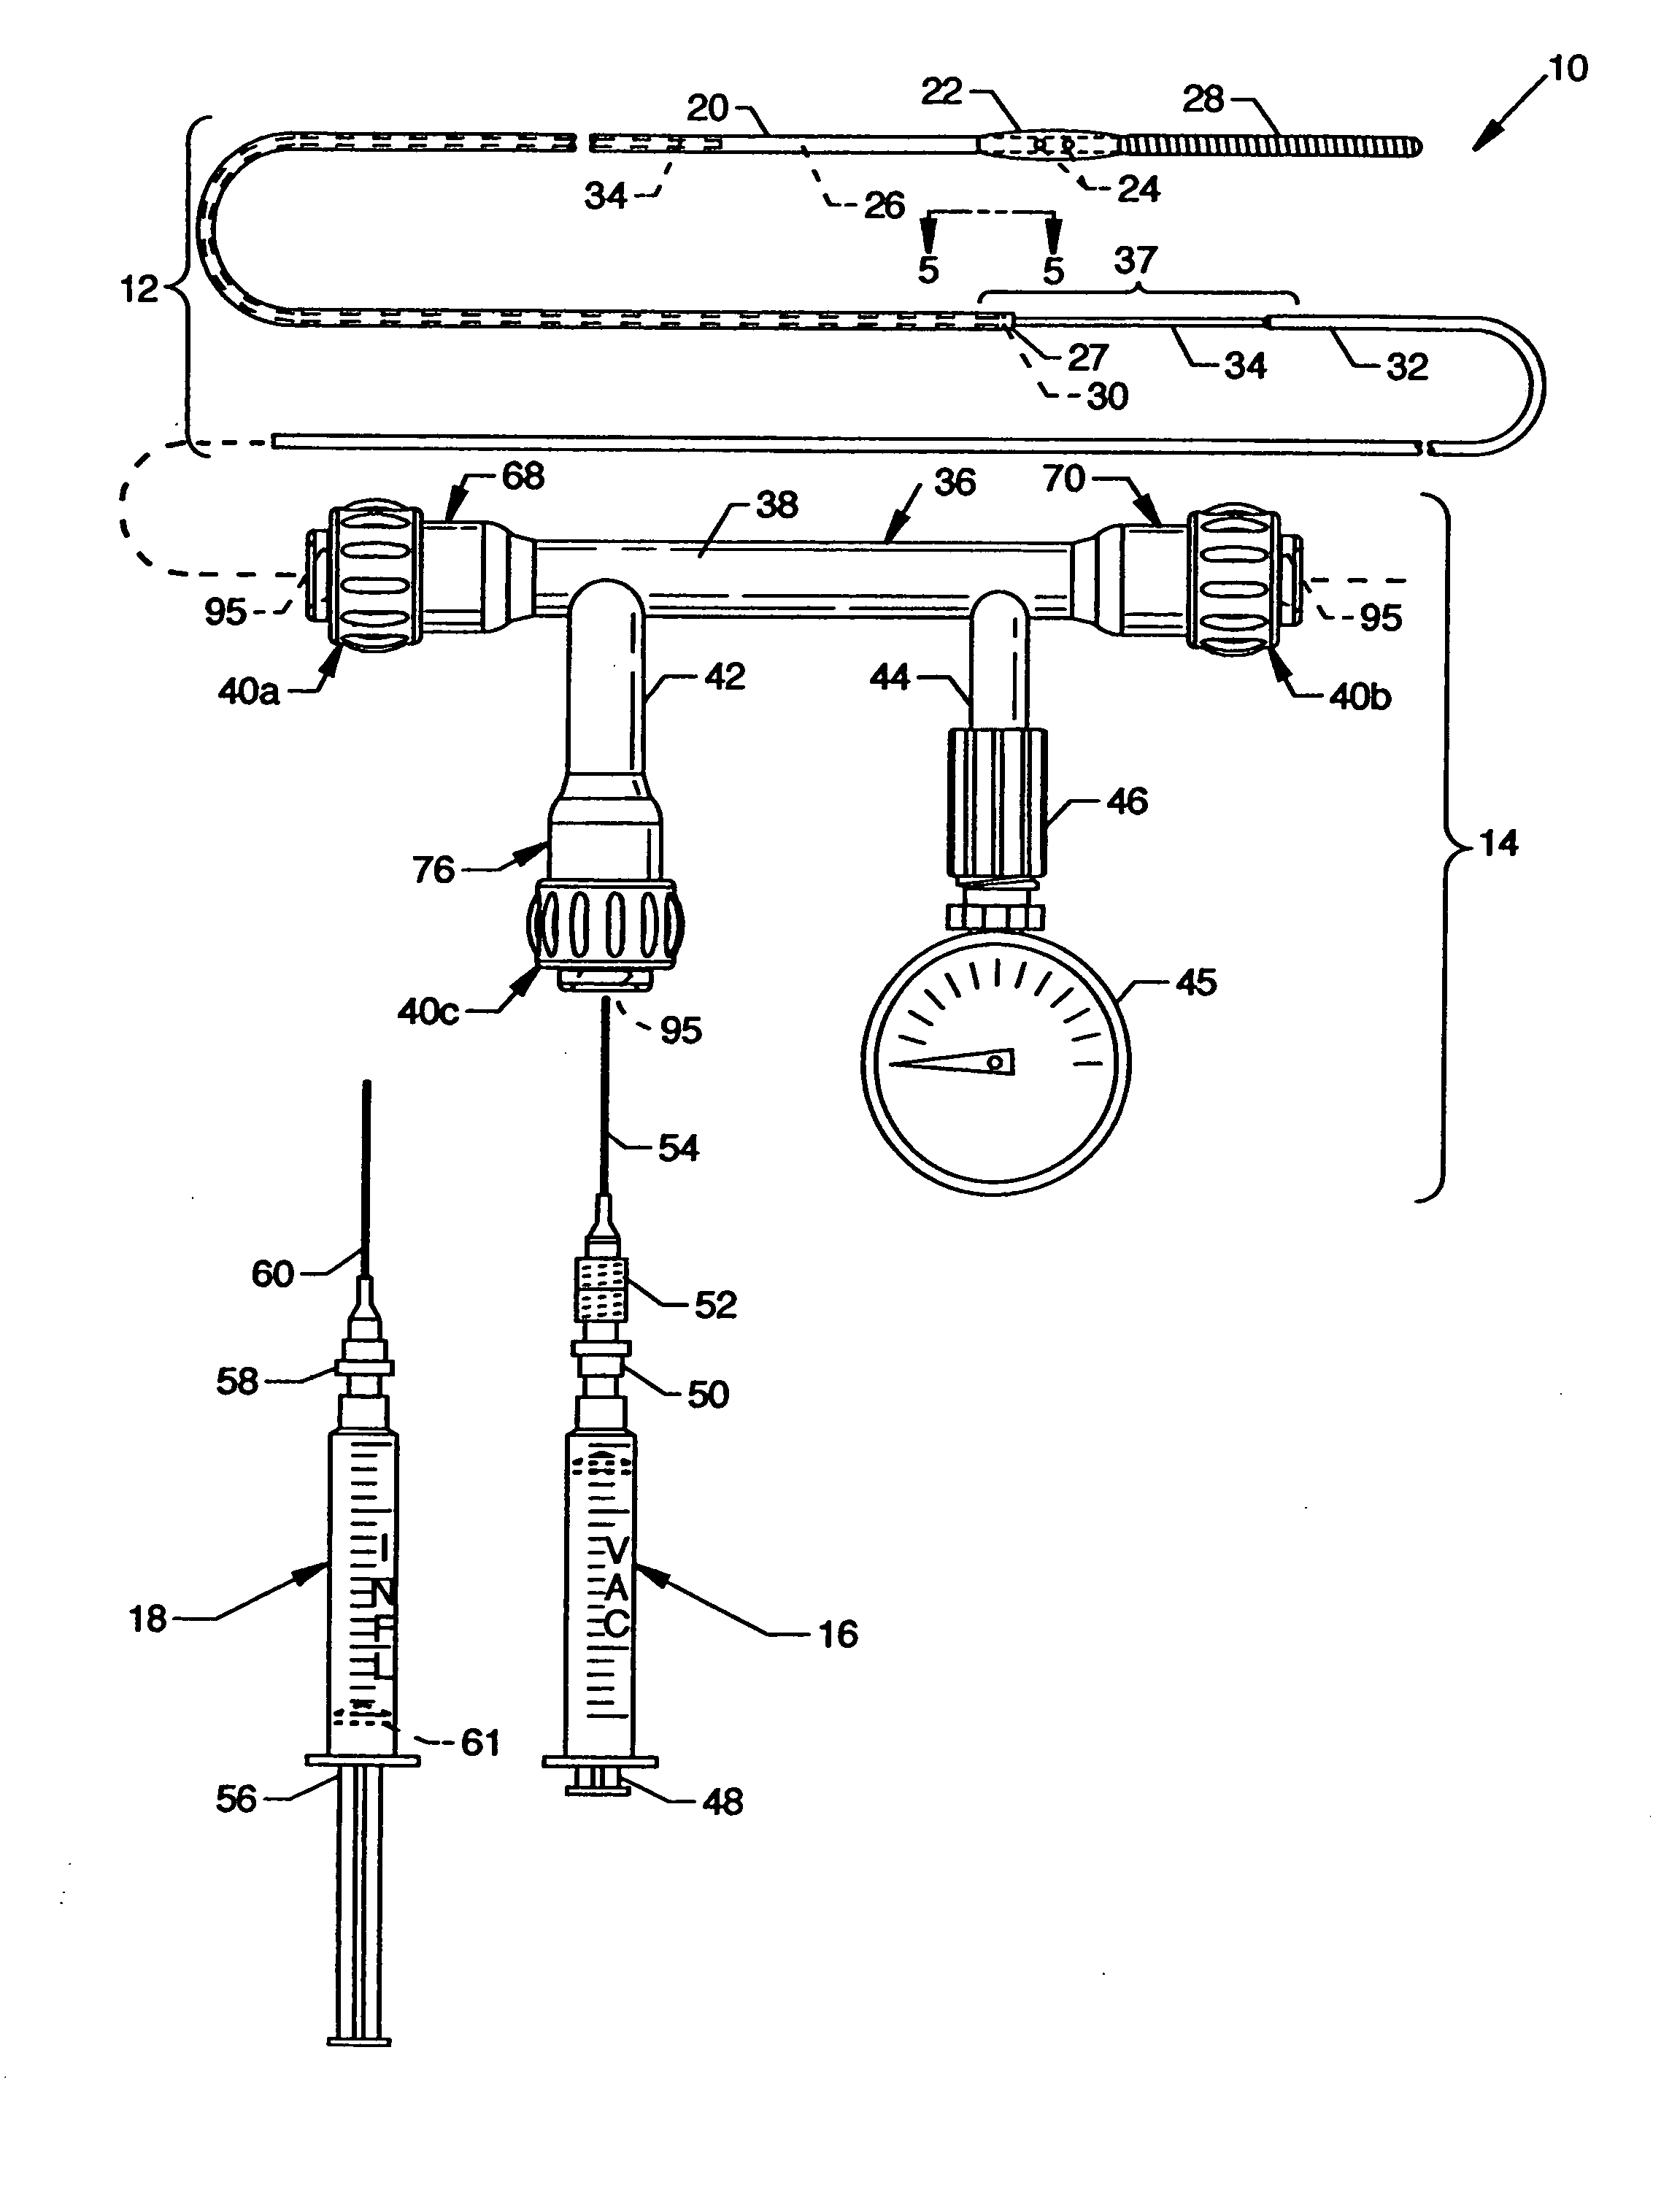 Gas inflation/evacuation system incorporating a multiple element valved guidewire assembly having an occlusive device